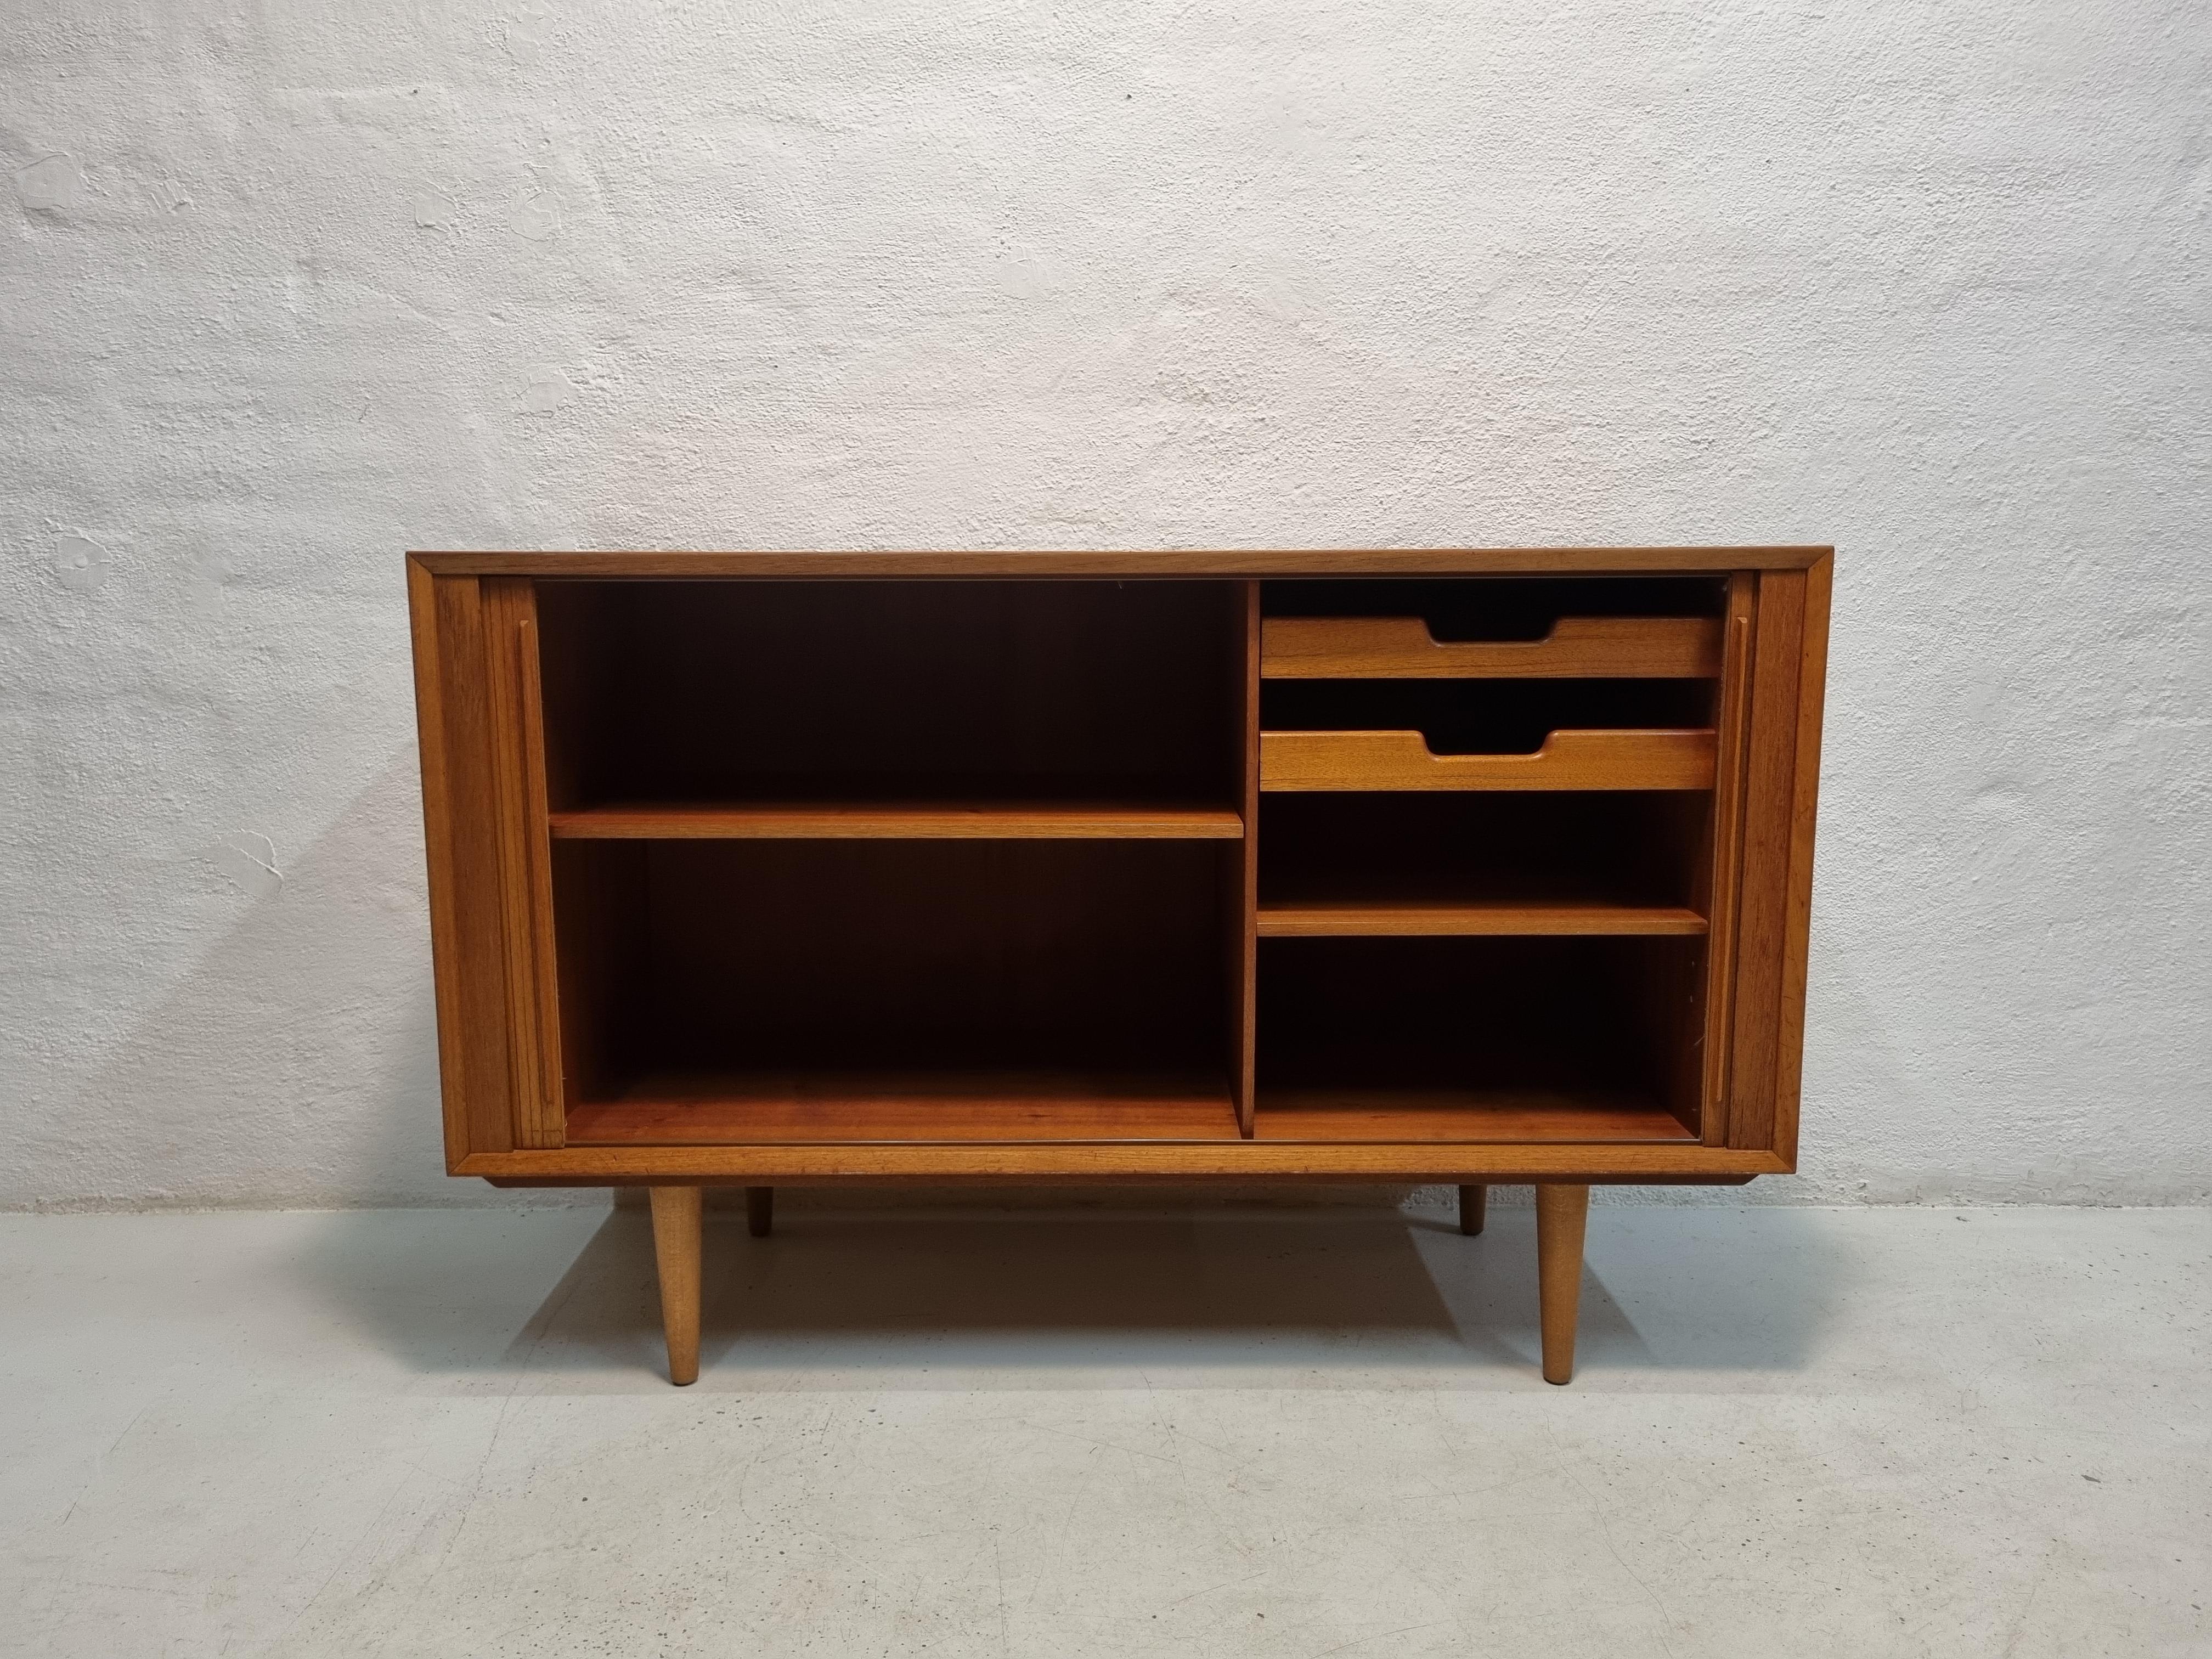 Teak sideboard with shutter doors. Manufactured at Ølholm Møbelfabrik.

Ølholm is the name of the town in Denmark where the furniture factory was located.

Ølholm had two furniture factories at the time, Ølholm Møbelfabrik owned by Sigfred Omann and